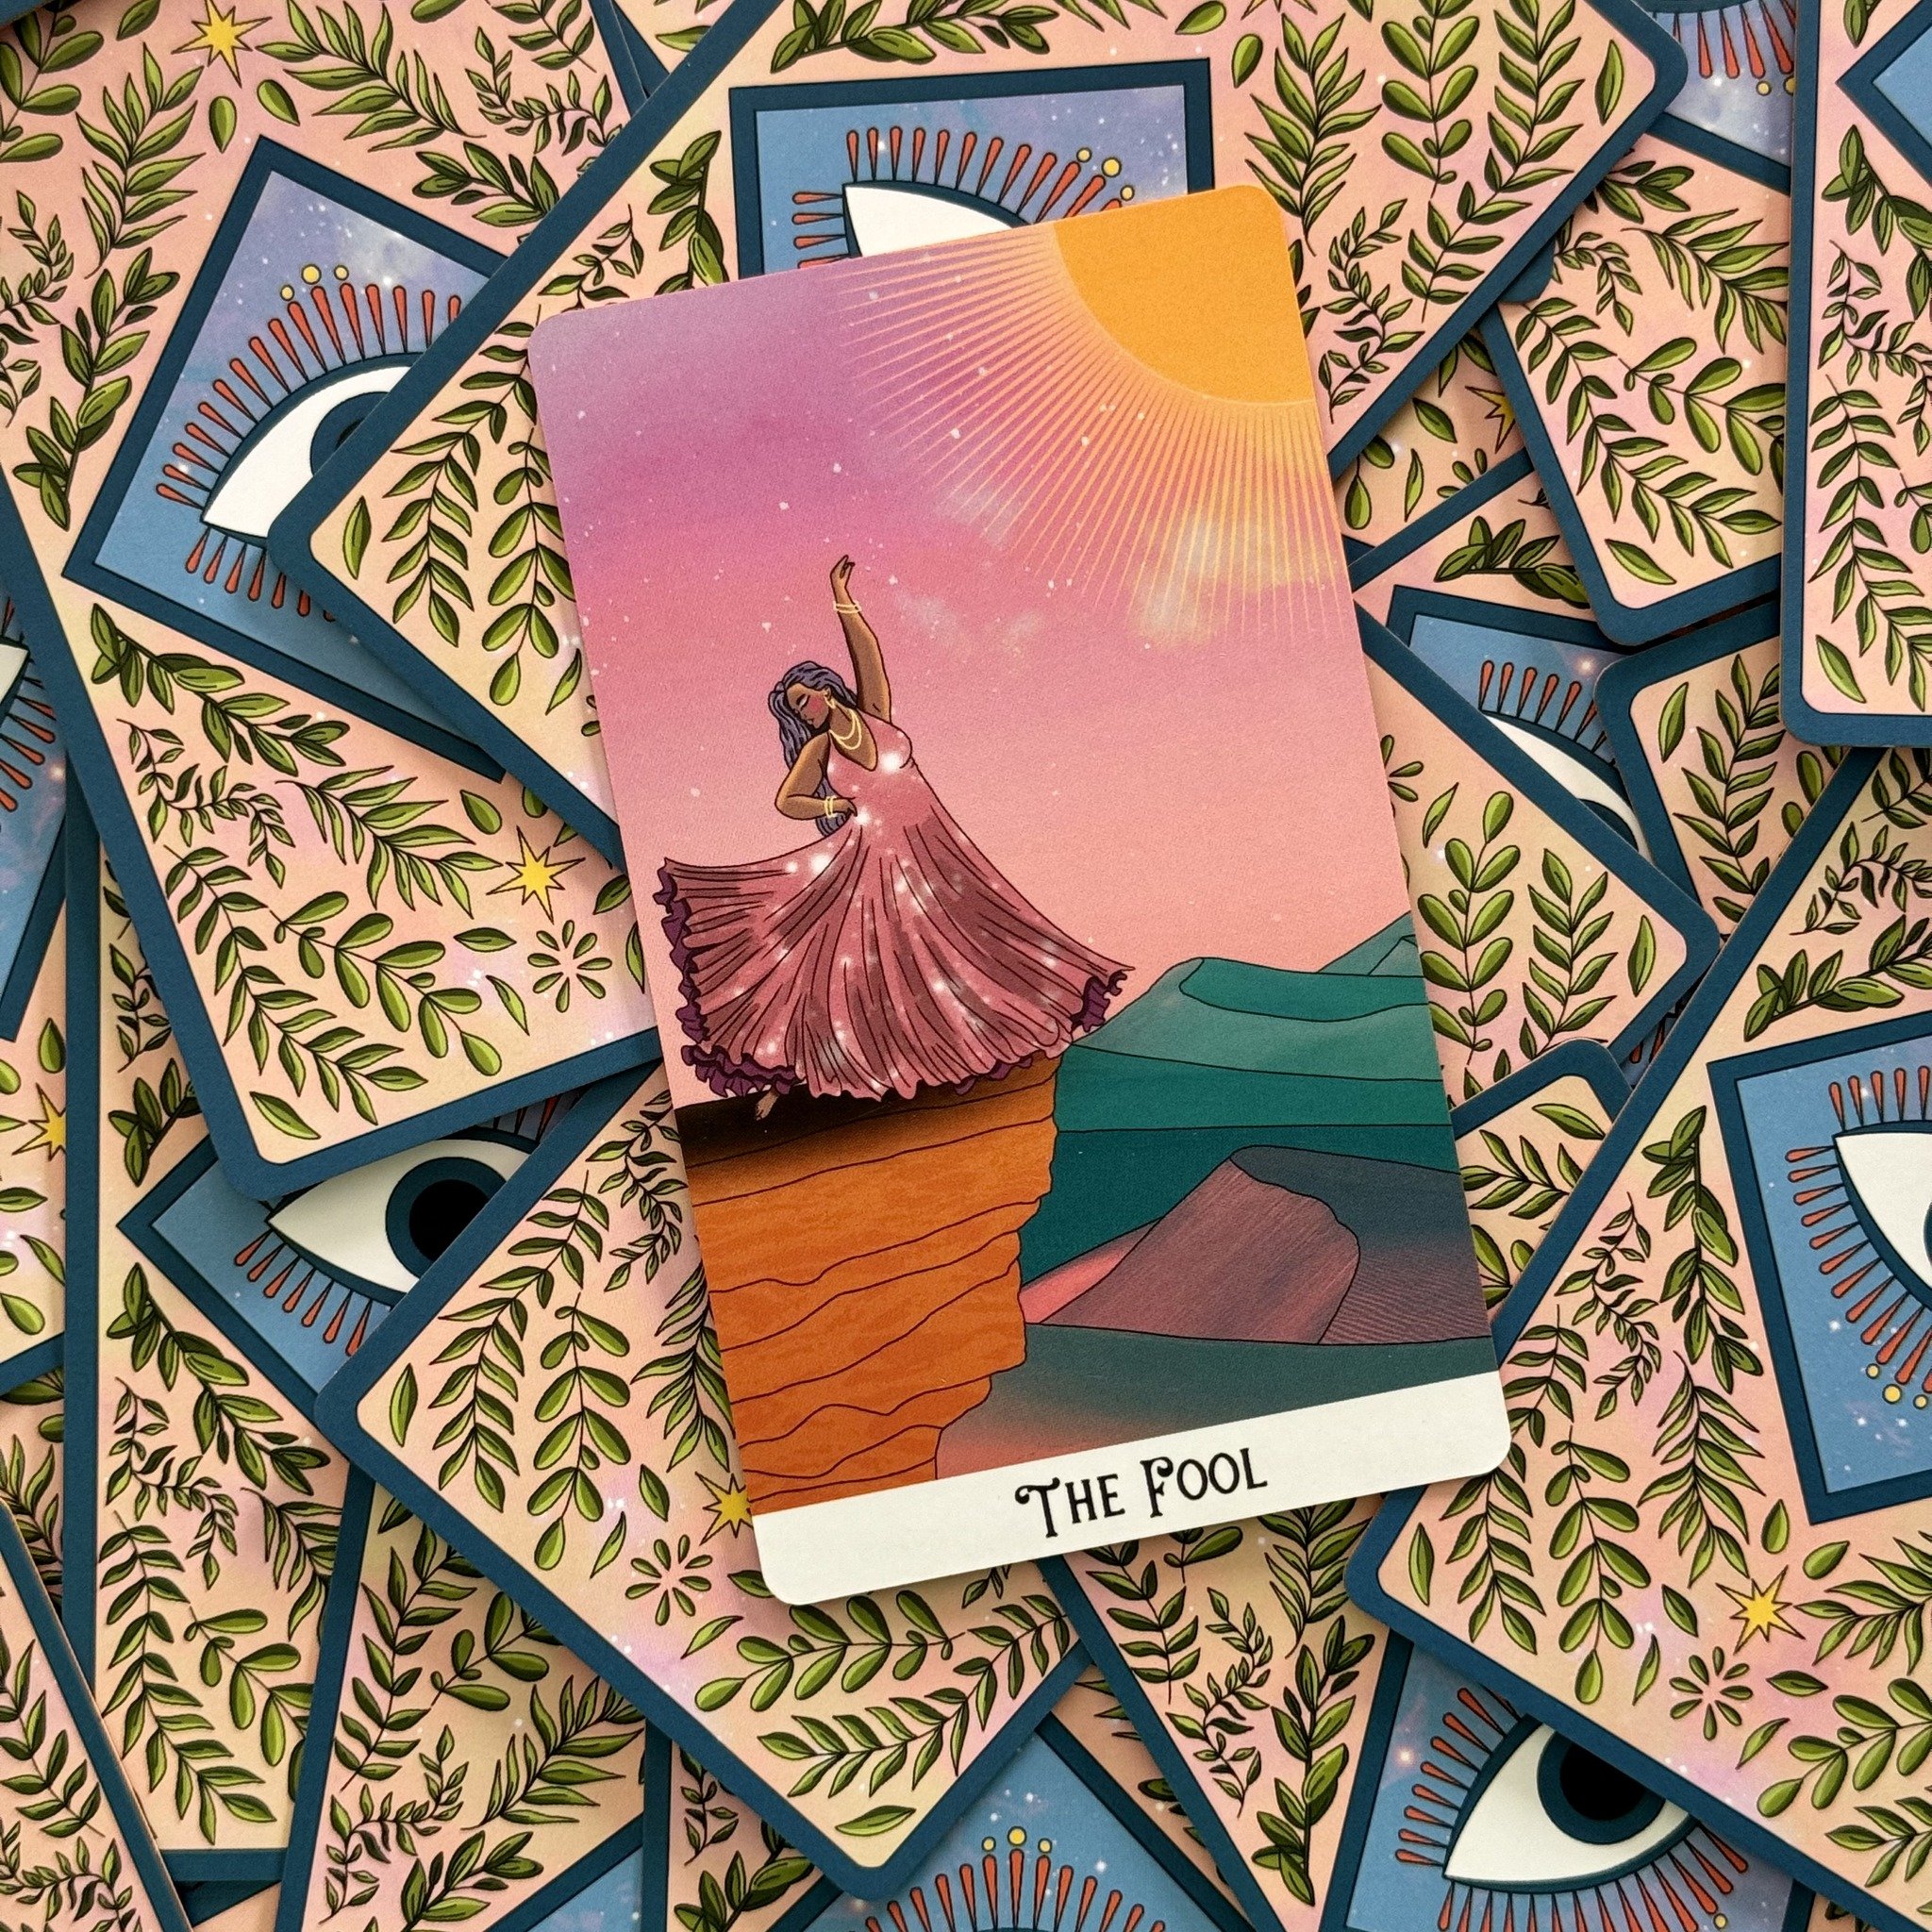 New deck interview: Mystic Soul Tarot
🧿 💖 🧿
The Mystic Soul Tarot by @moonandcactus is a loving deck for positive focus without fluffing you up with false promises or praise. It&rsquo;s honest and earnest and dazzling so that those quiet moments s